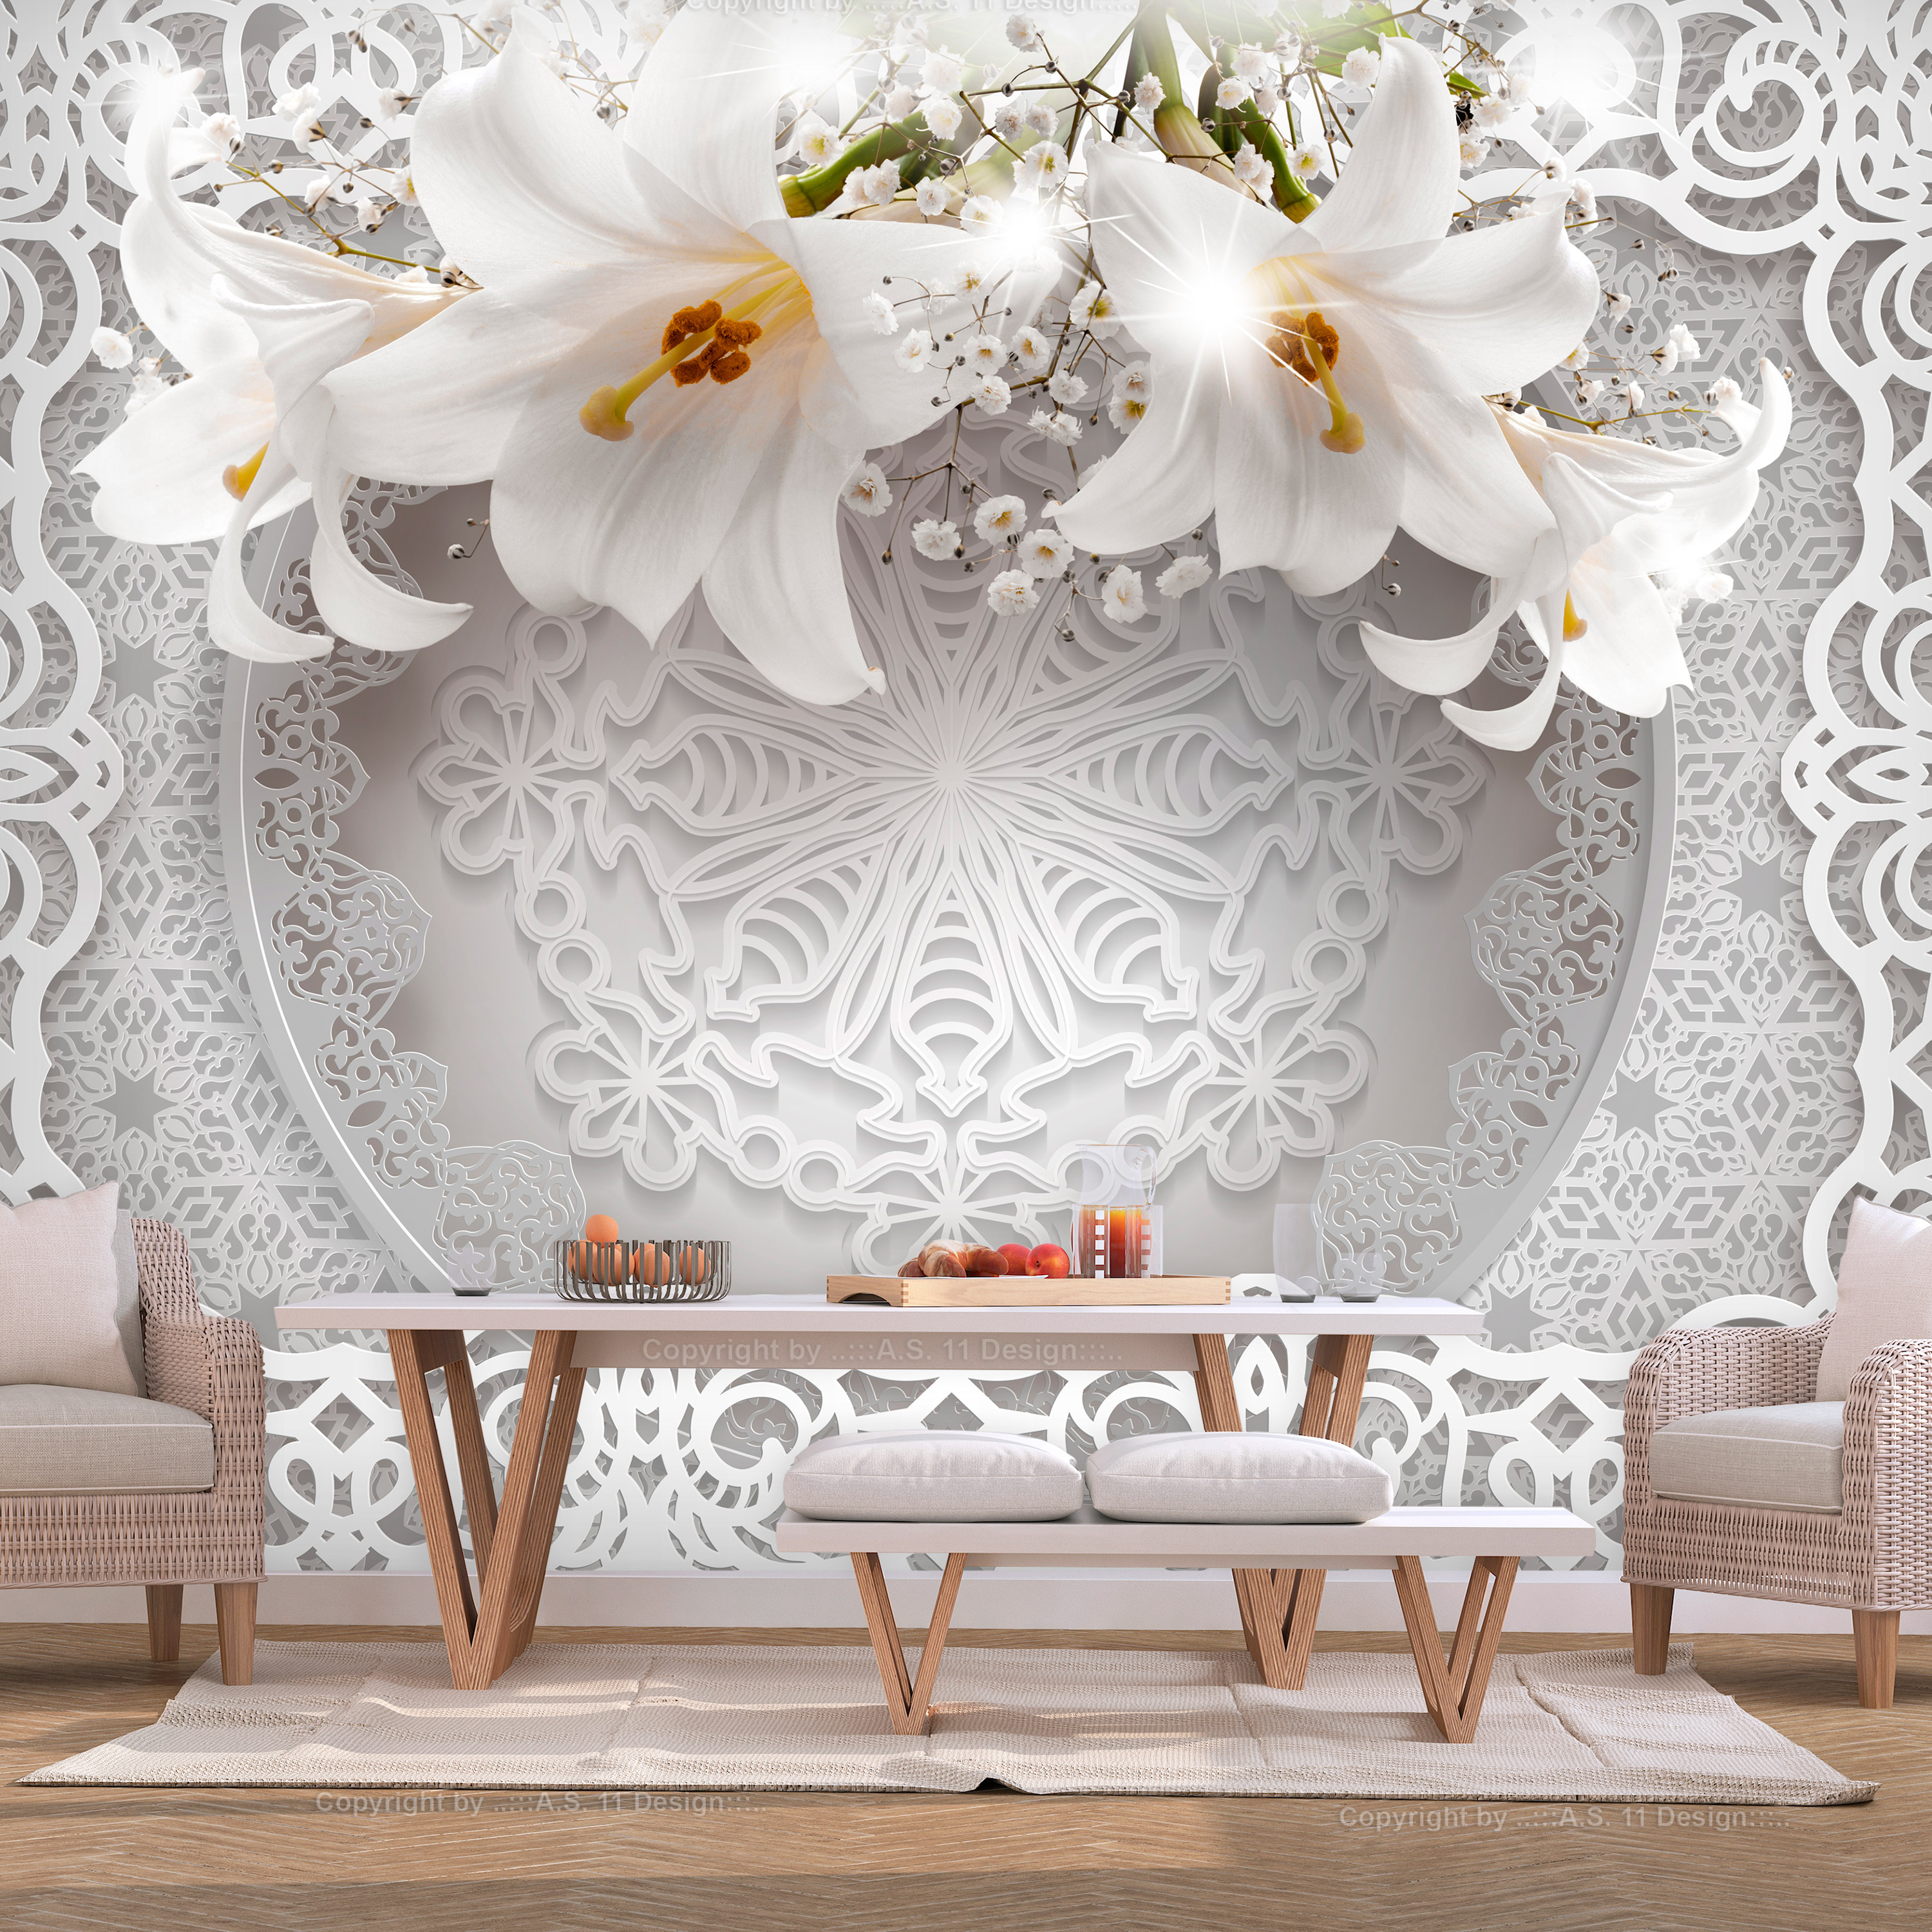 Self-adhesive Wallpaper - Lilies and Ornaments - 196x140